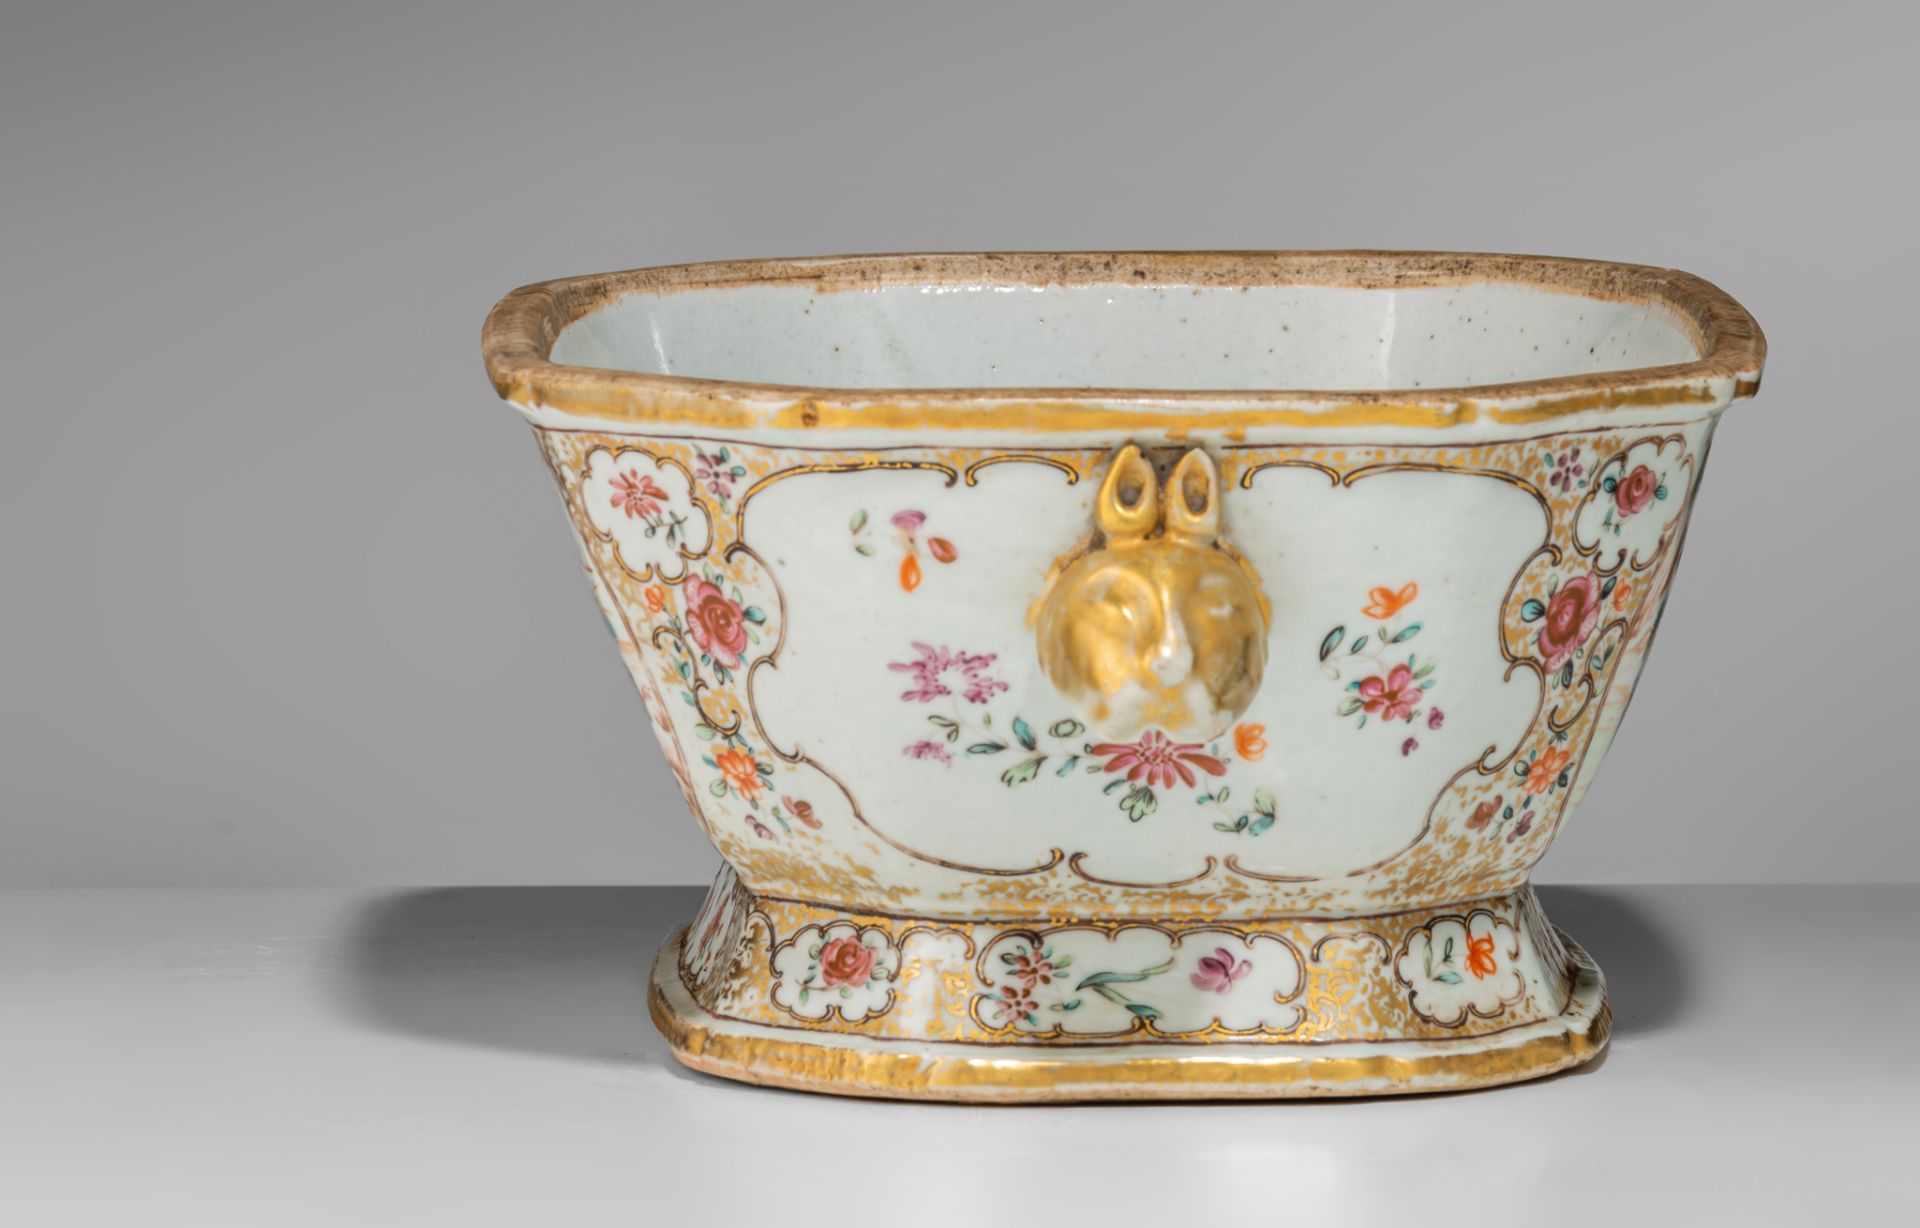 A collection of famille rose and gilt decorated export porcelain ware, 18thC, largest - H 12,5 - 34, - Image 11 of 20